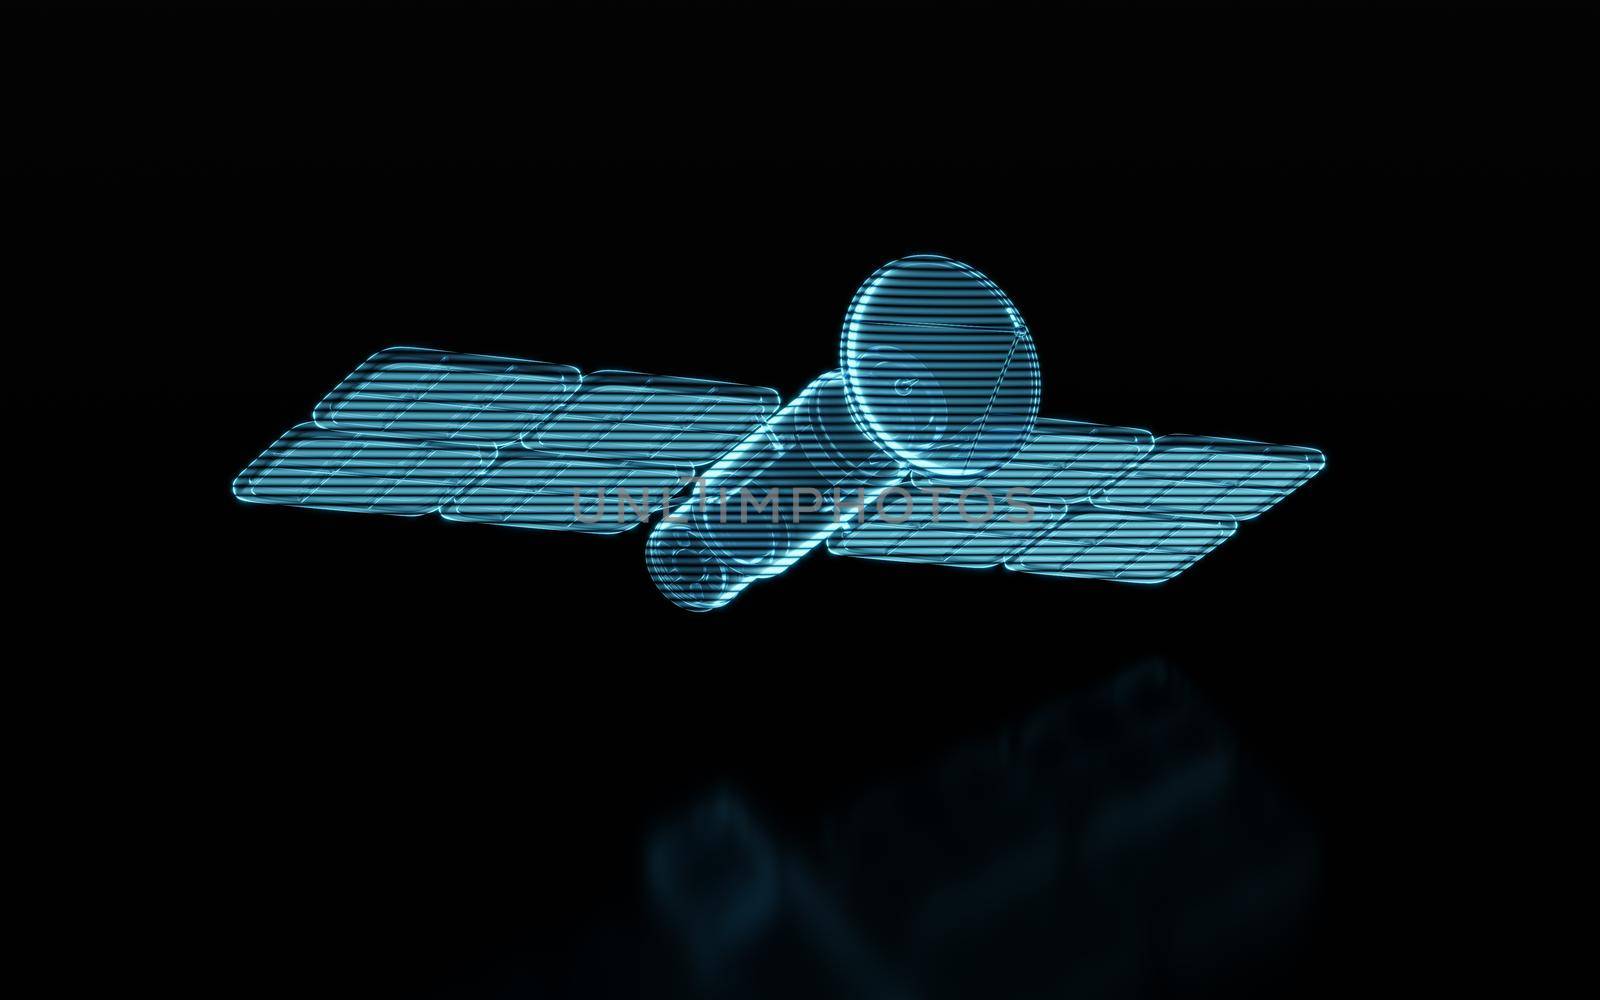 Artificial satellite with hologram figure, 3d rendering. by vinkfan